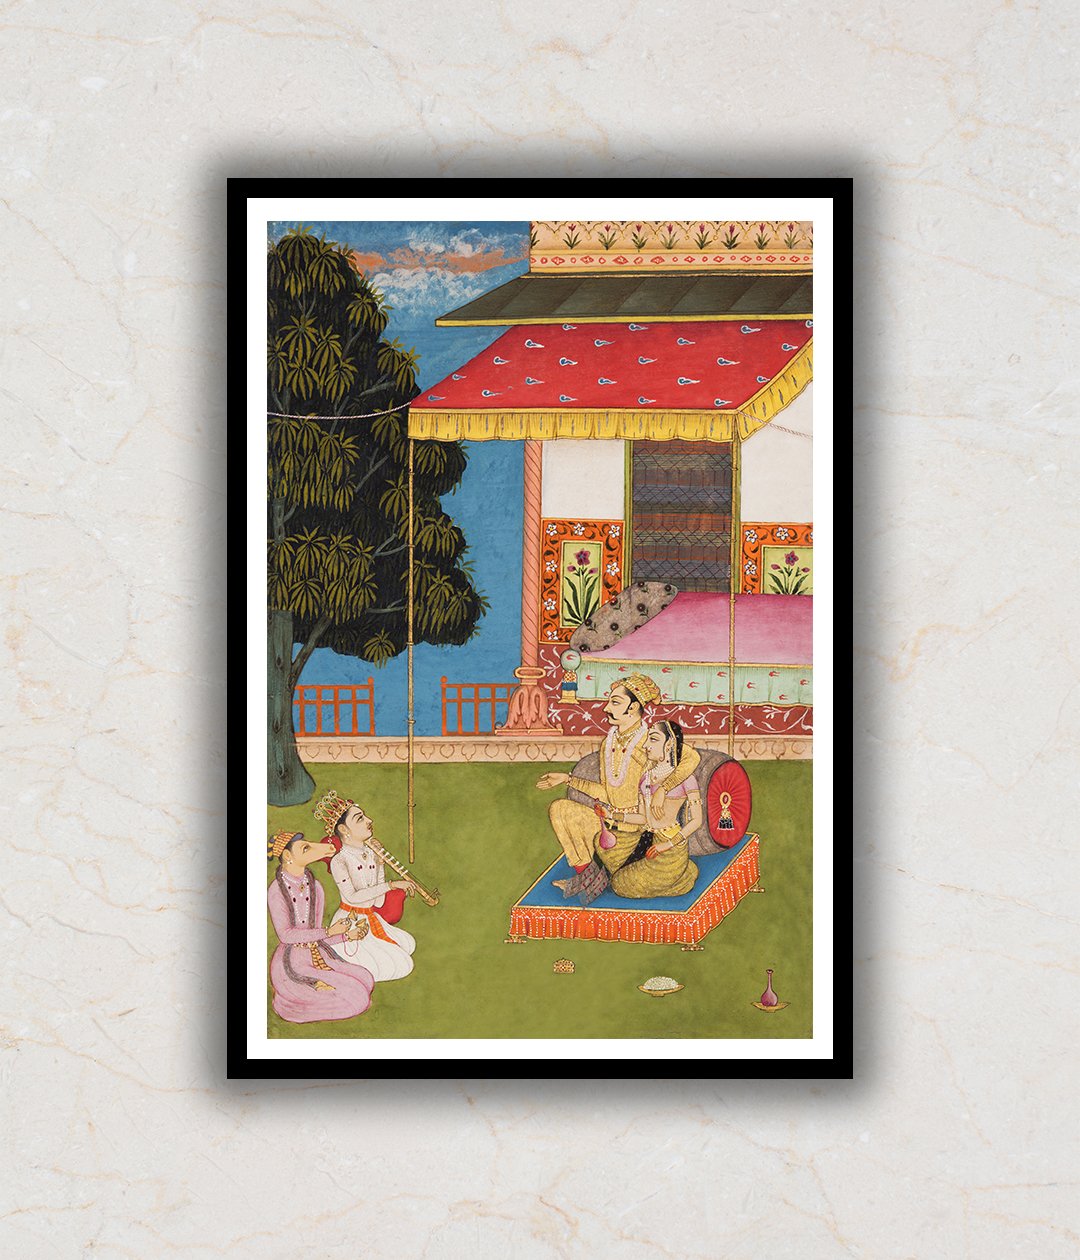 Shri Raga, from a Ragamala (Garland of Melodies) Indian Miniature Art Painting For Home Wall Art Decor